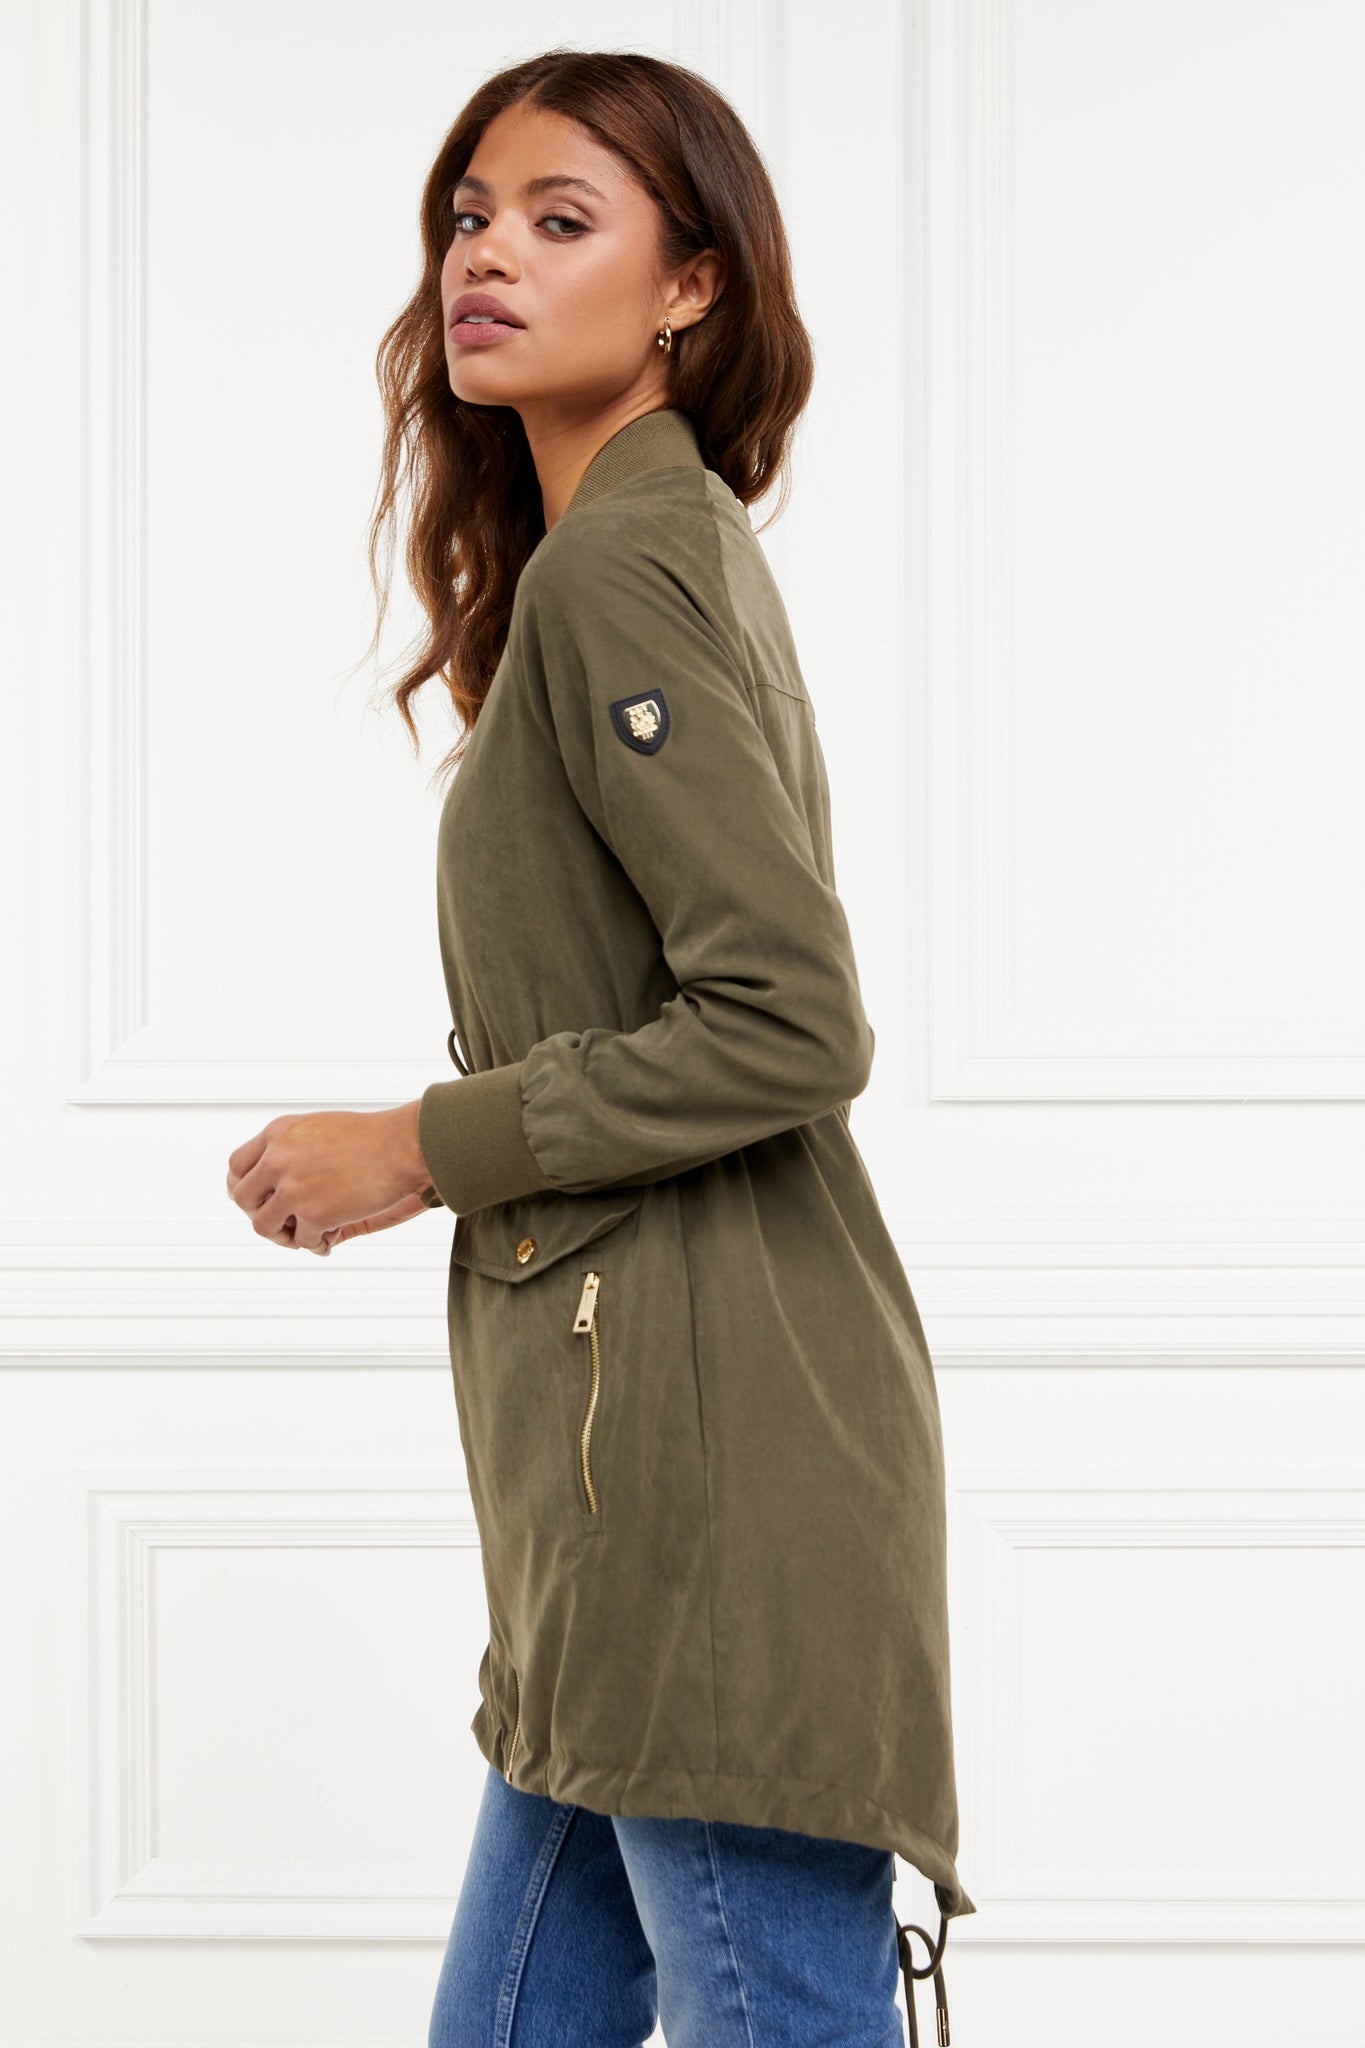 side of brushed suede longline lightweight parka jacket in khaki with an adjustable drawstring waist and fishtail hem and ribbed baseball style jersey collar and cuffs finished with gold hardware and gold shield on sleeve